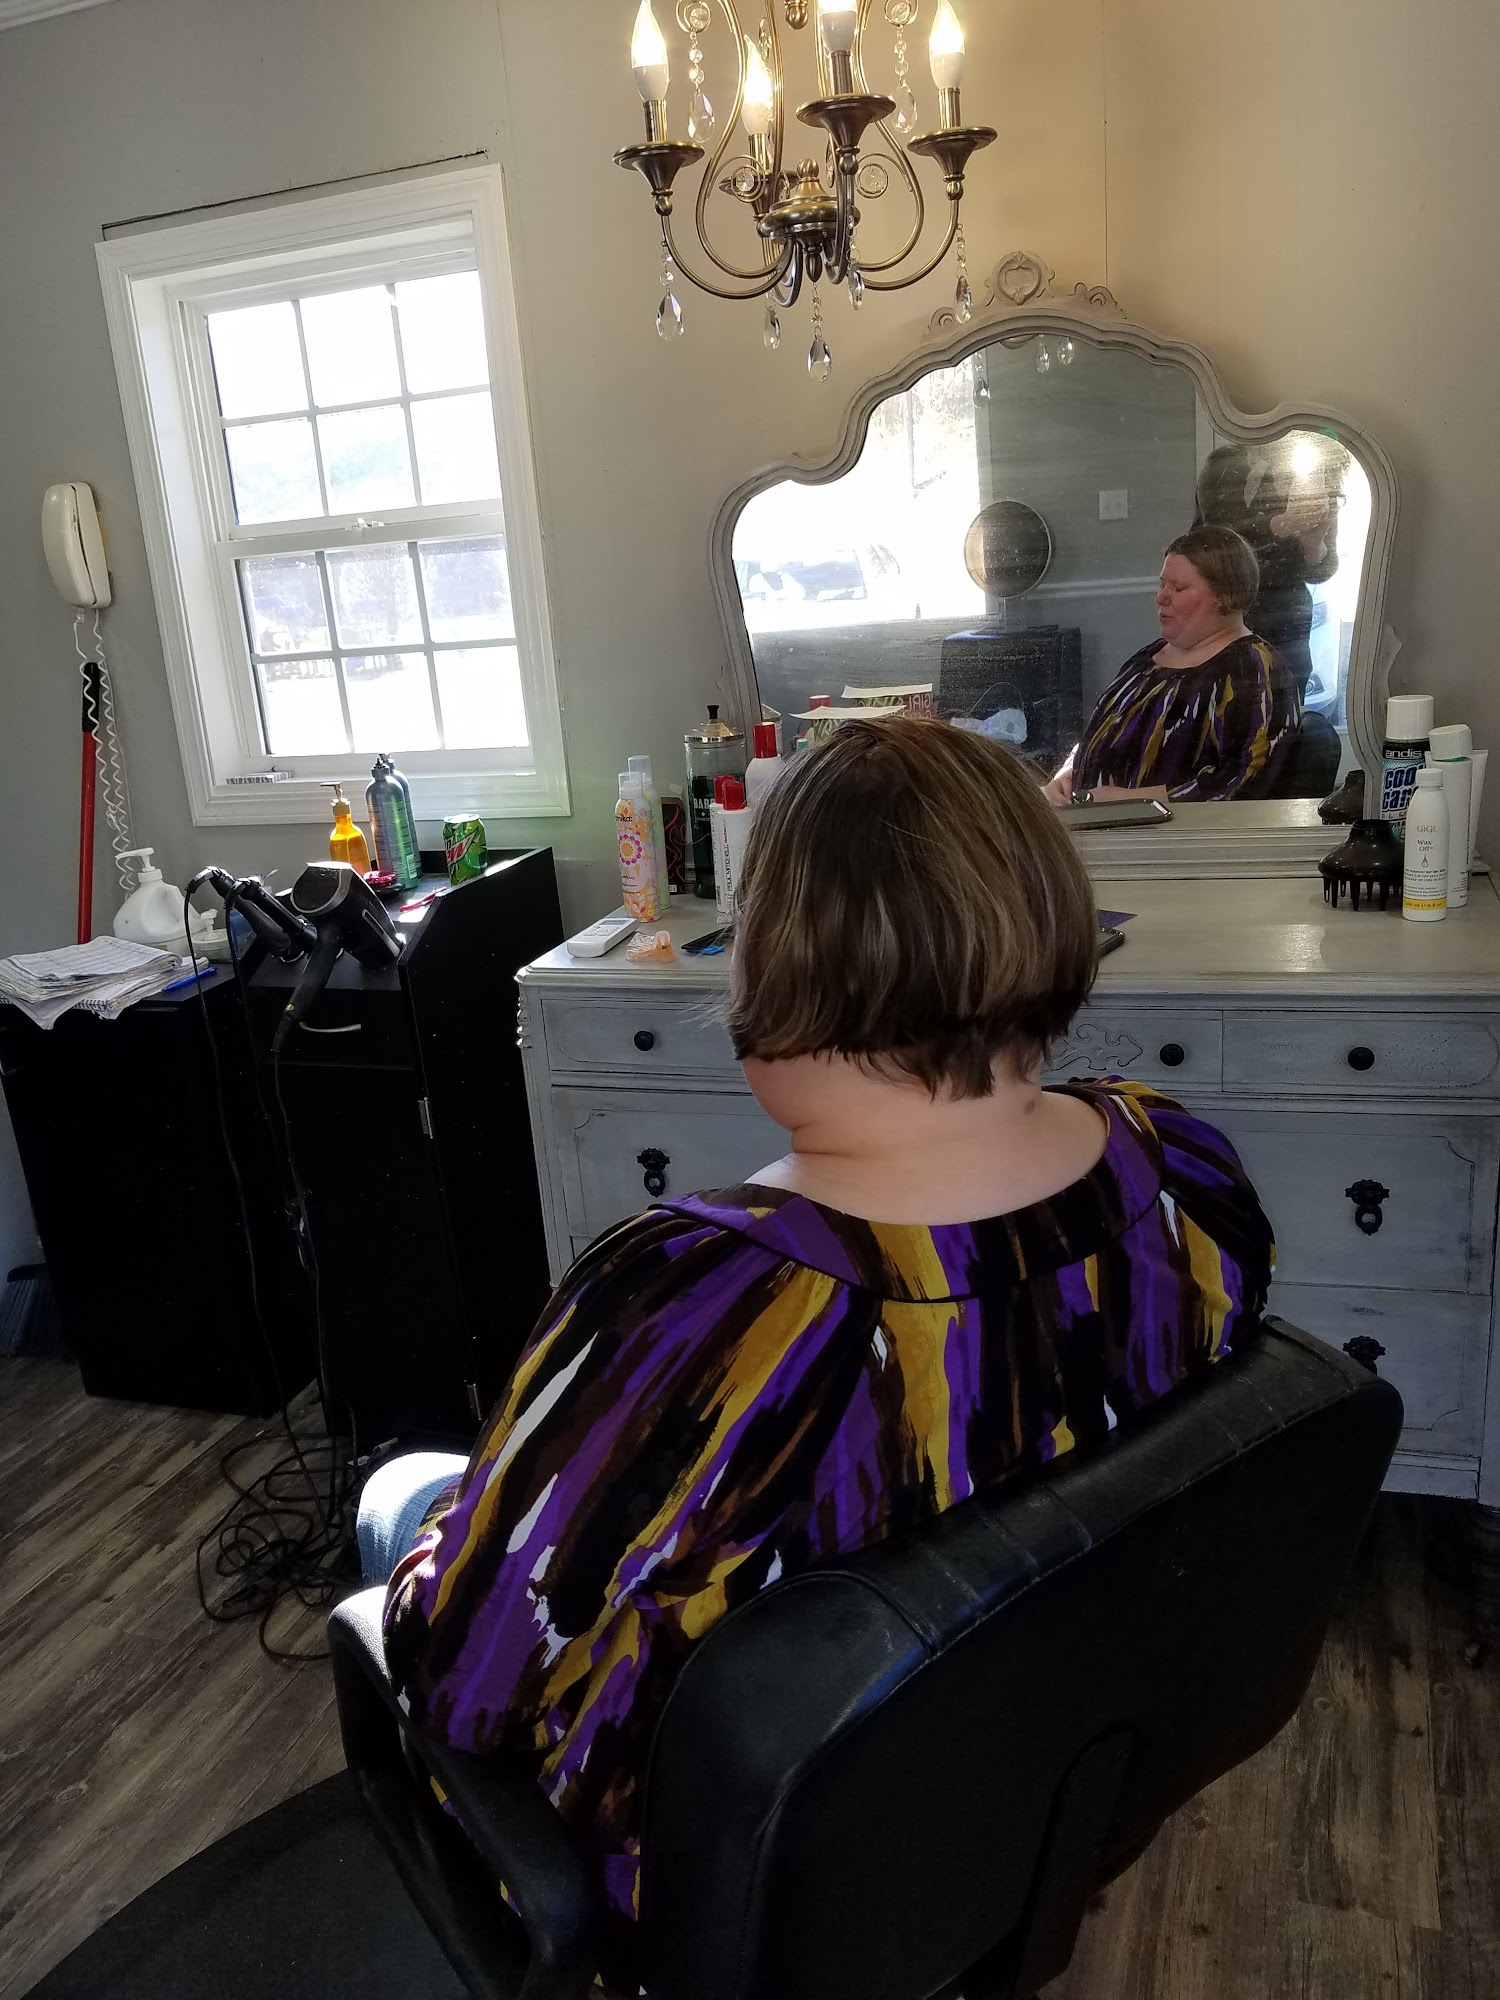 Heather's Hair Salon 17230 Clay County Hwy, Red Boiling Springs Tennessee 37150